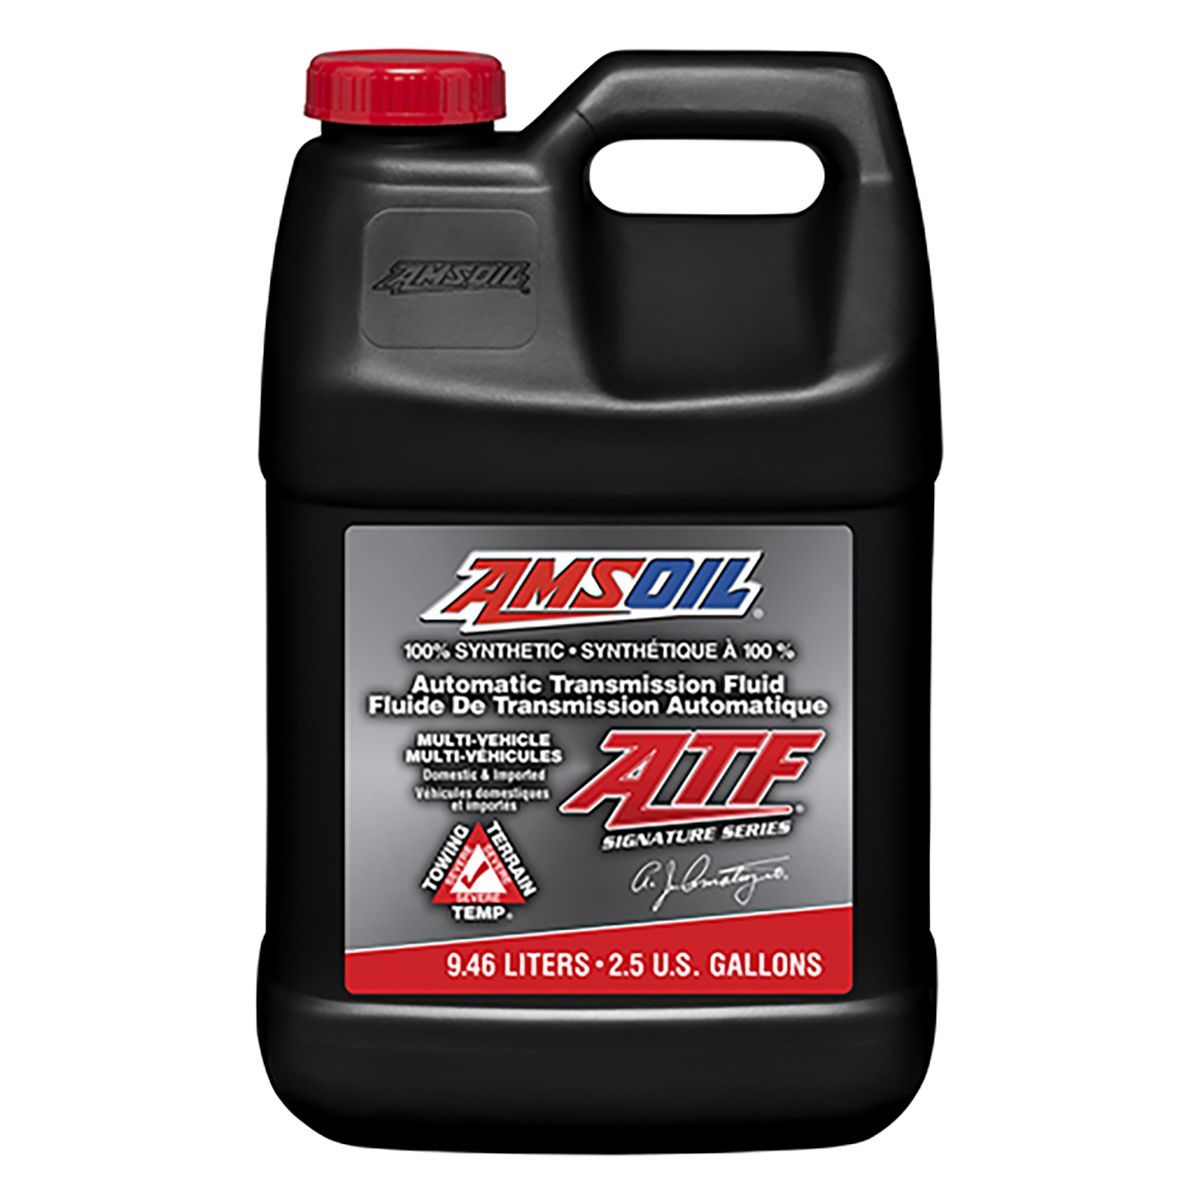 AMSOIL transmission Fluid. 00718atf00. AMSOIL V-Twin Synthetic transmission Fluid. Масло ATF 09x. Amsoil signature series synthetic